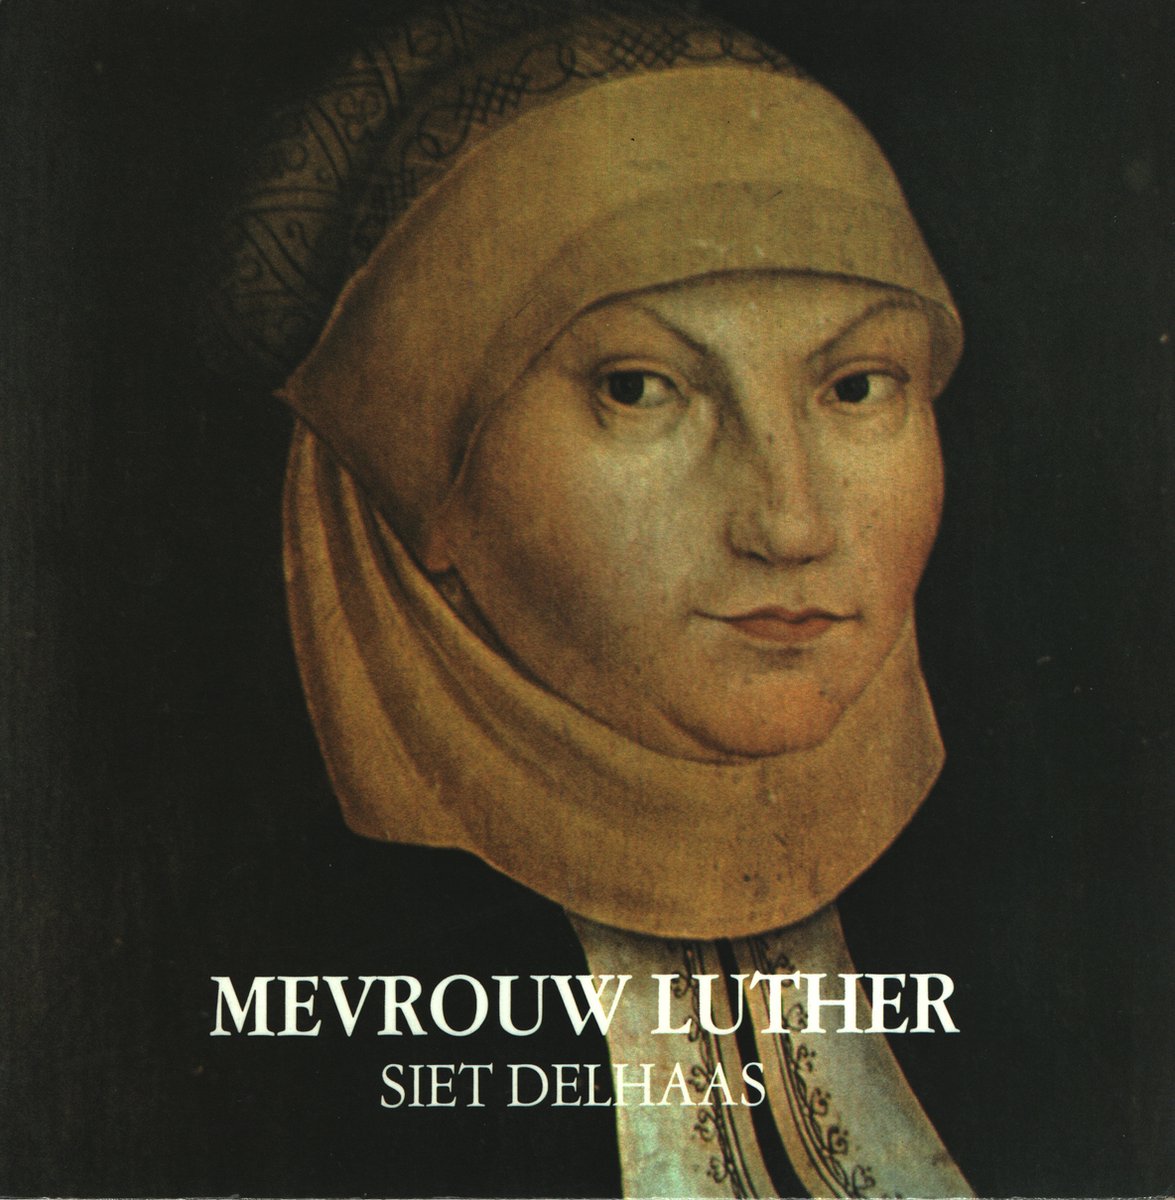 Mevrouw luther